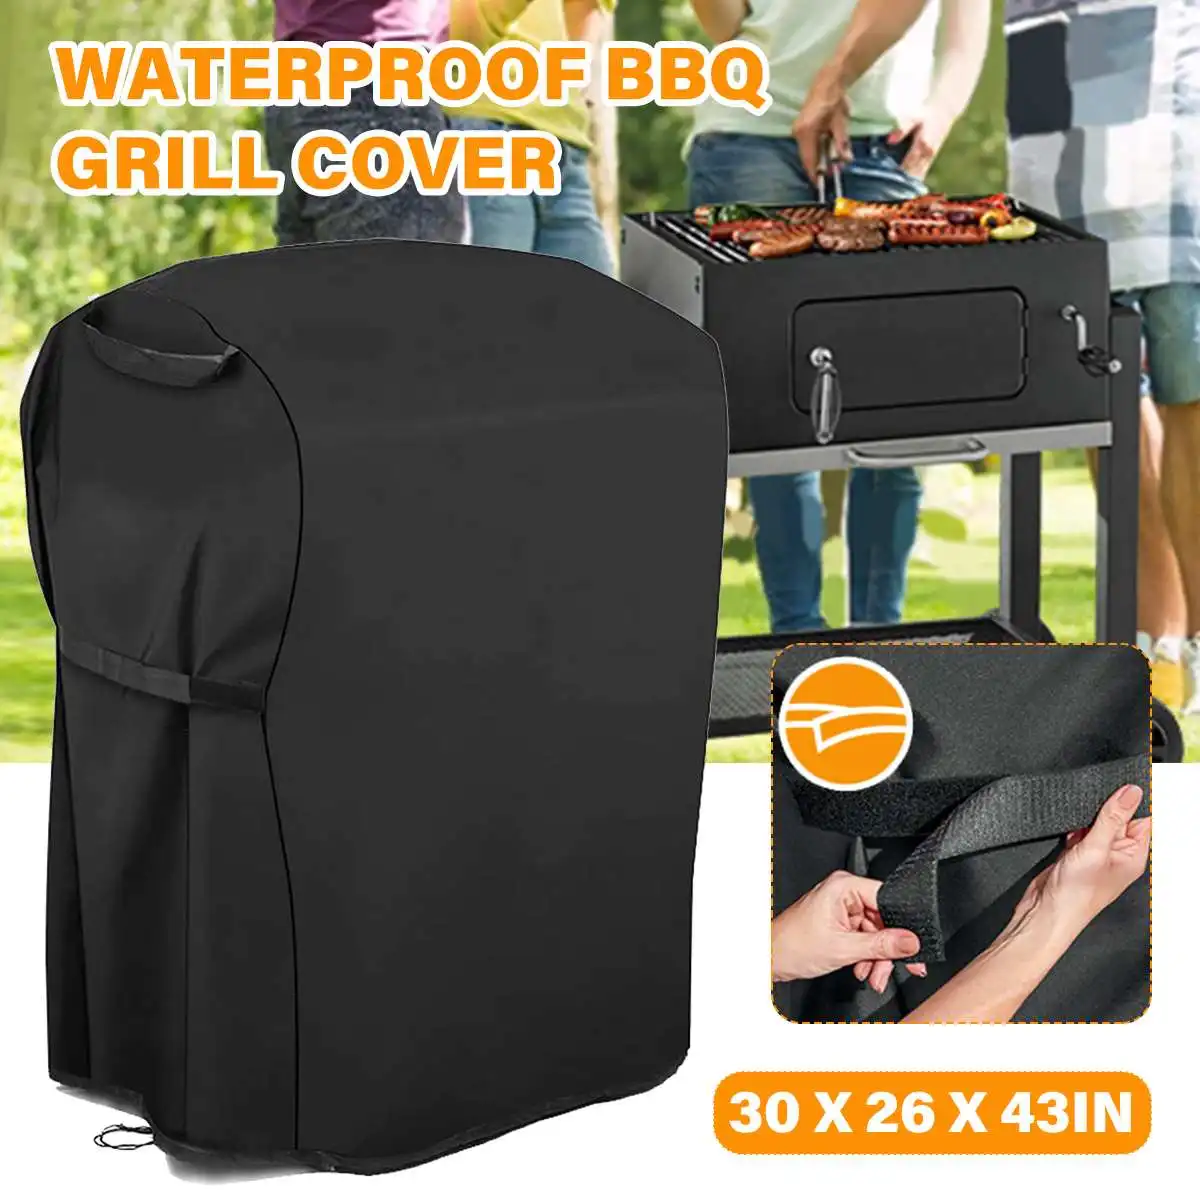 420D Oxford BBQ Cover Outdoor Dust Waterproof Heavy Duty Grill Cover Rain Snow Protective UV Block Outdoor Barbecue Accessory